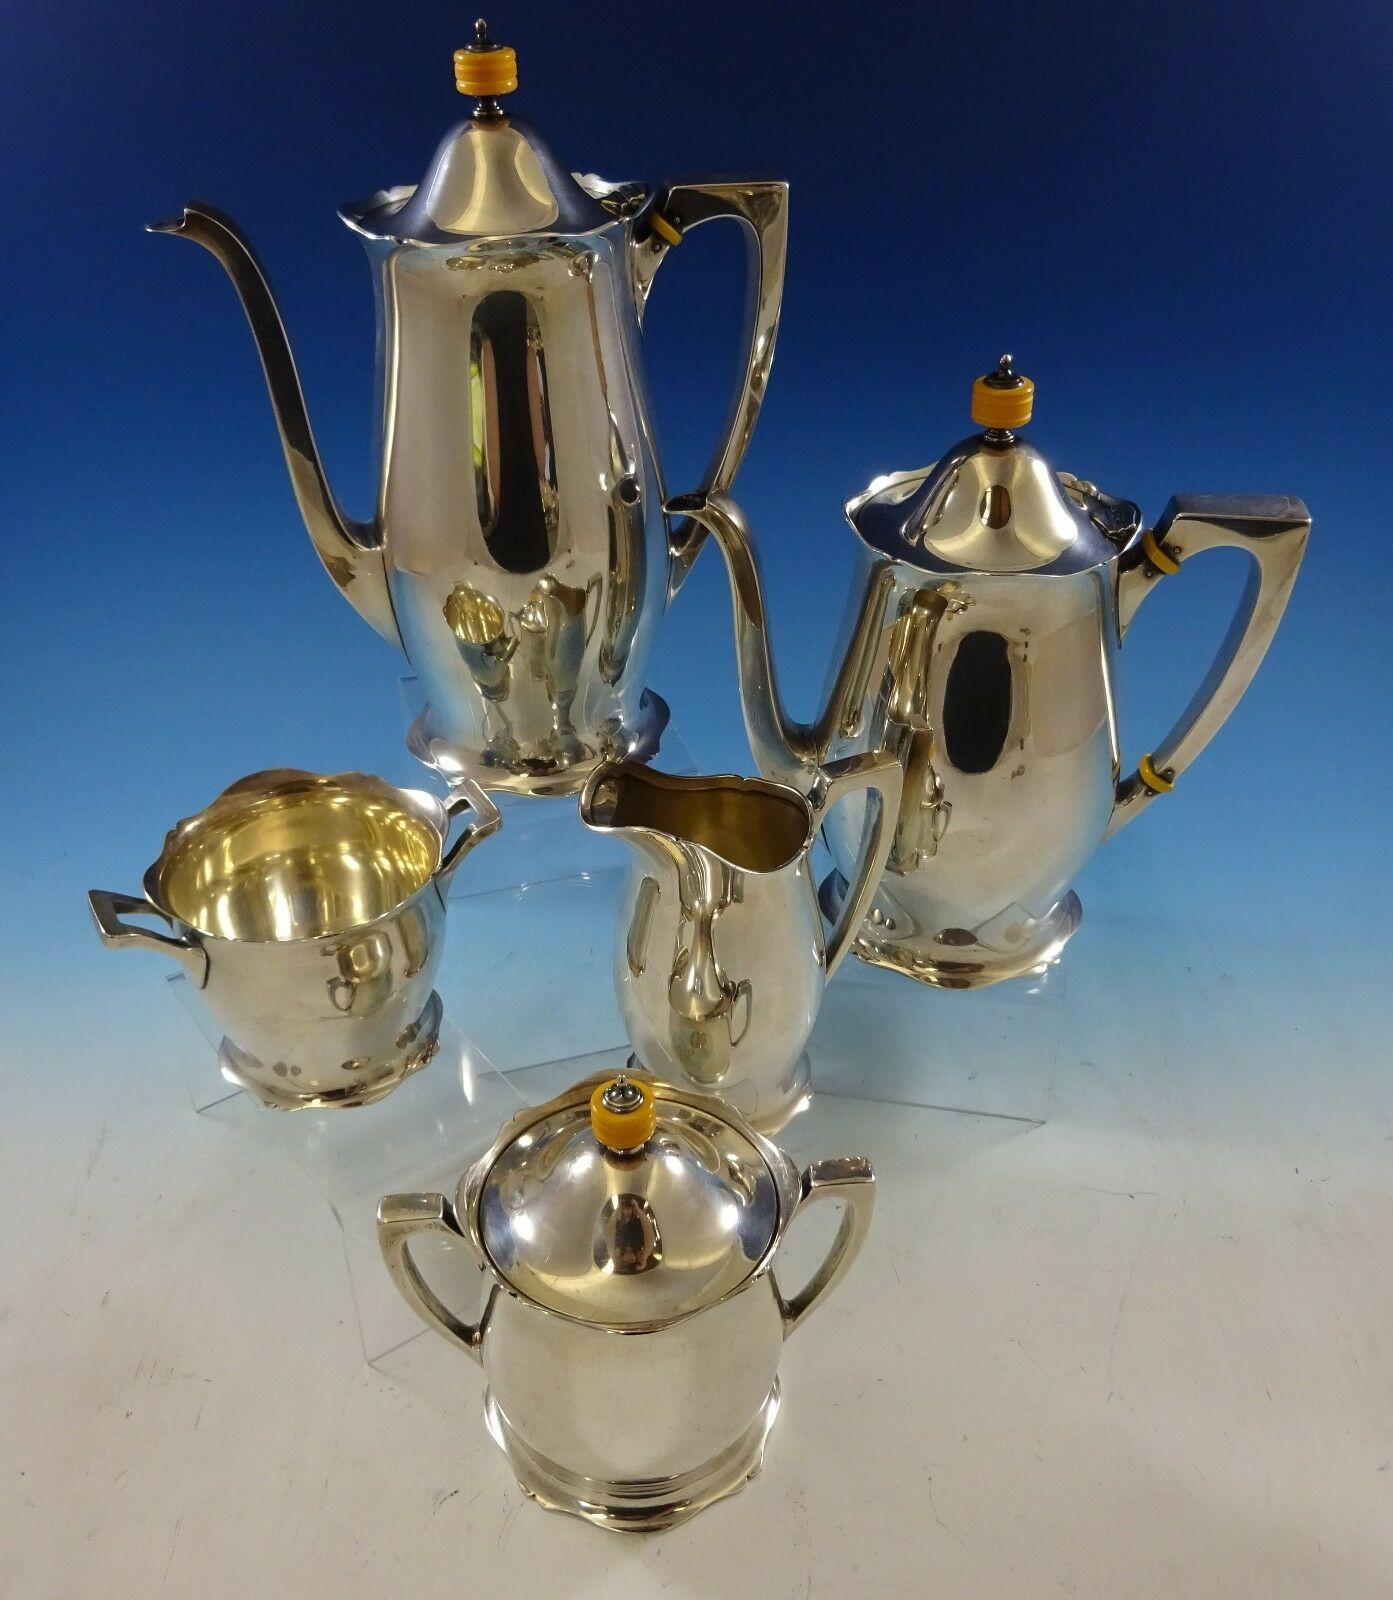 Antique by Wallace

Beautiful antique by Wallace sterling silver tea set 5-piece with bakelite finials. The set includes:

1 - Coffee pot: Measures 8 1/2